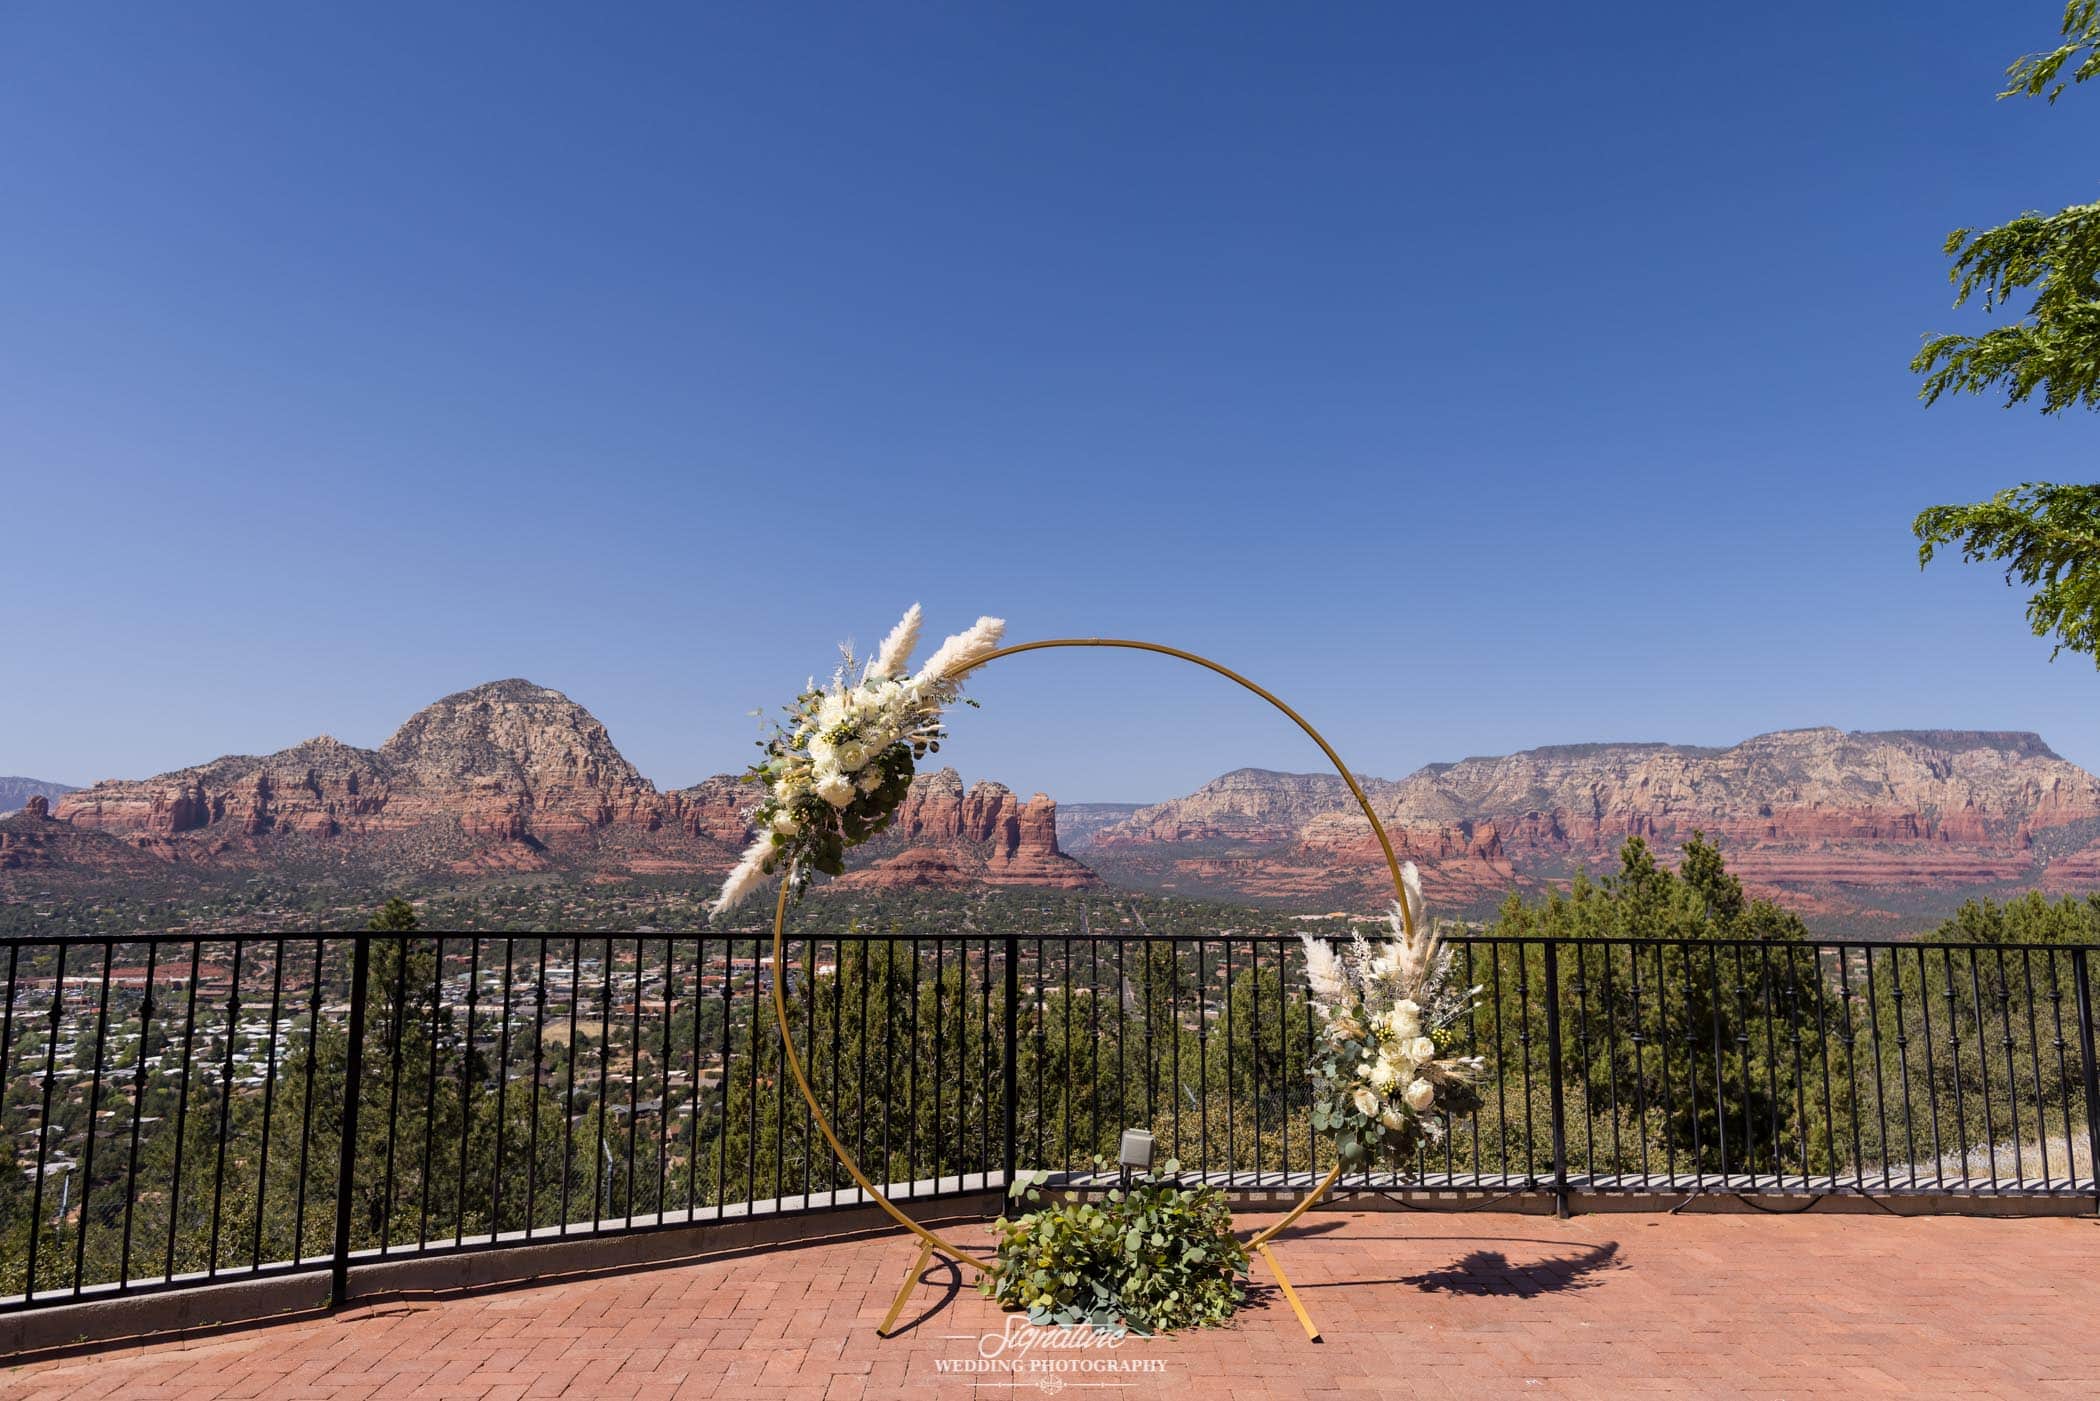 Wedding ring arch in front of desert mountains